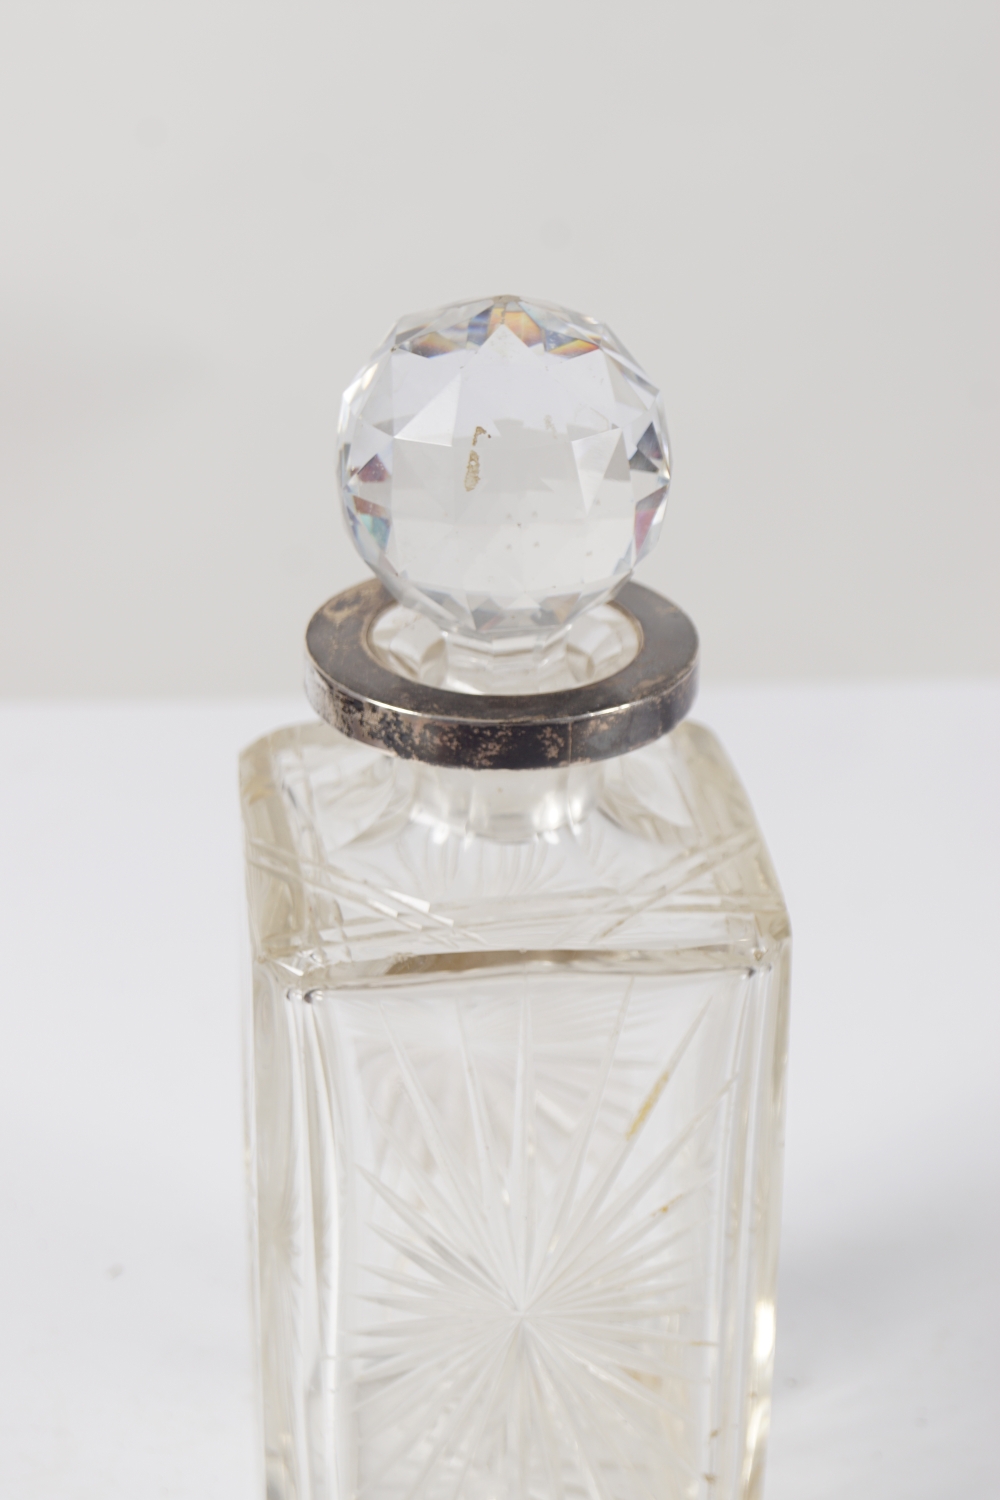 SILVER MOUNTED CRYSTAL DECANTER - Image 2 of 3